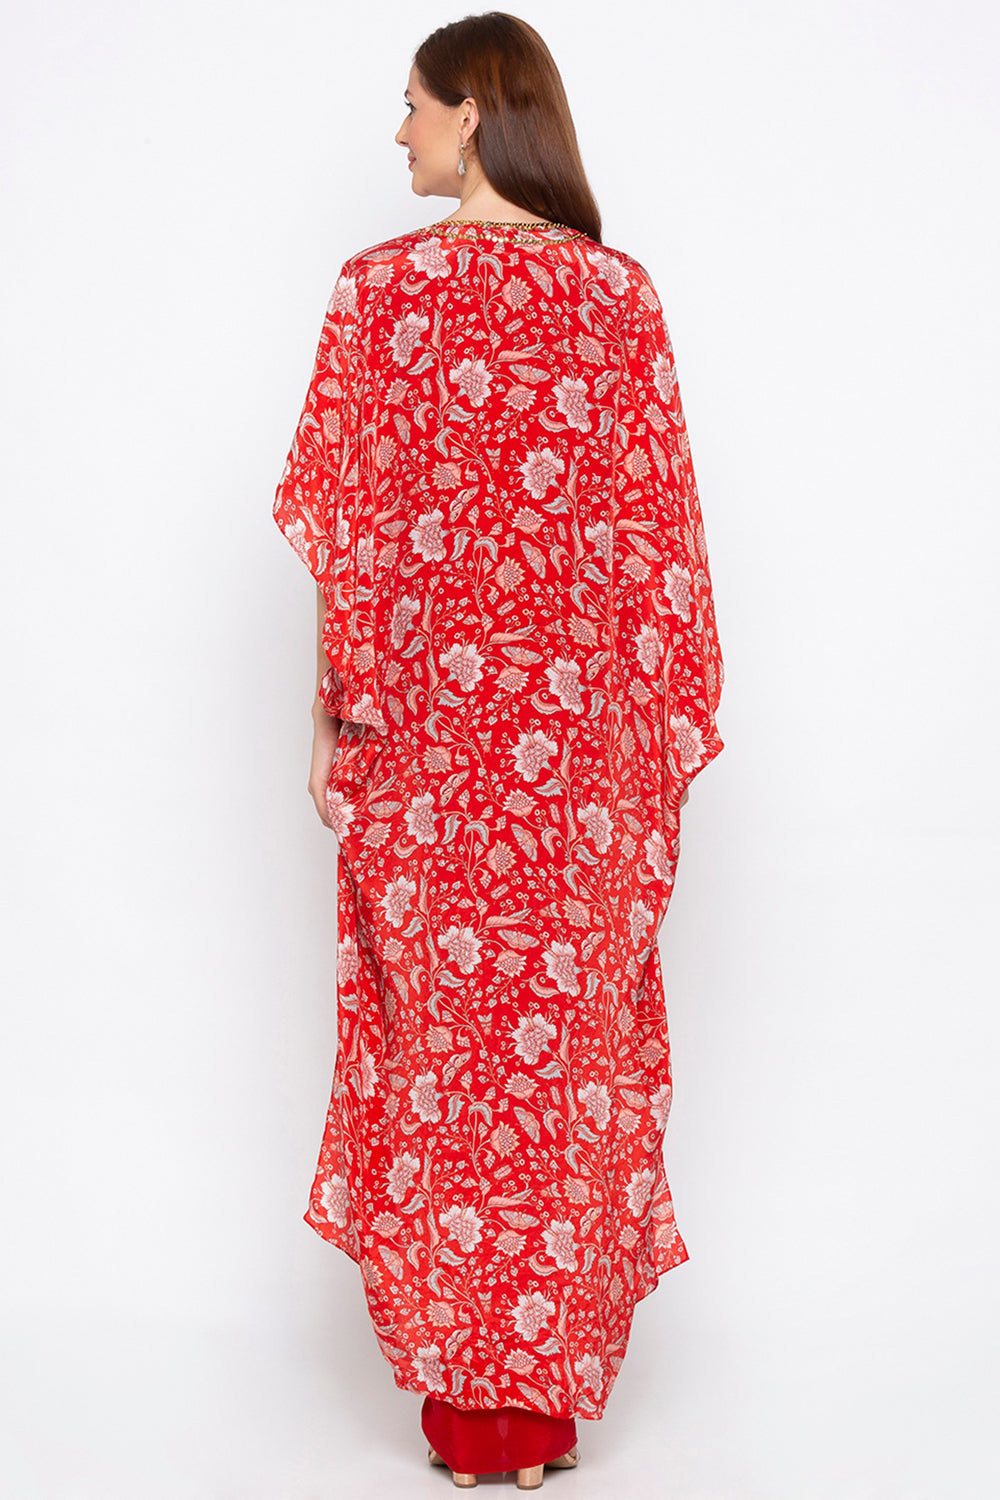 Wild-Flower Printed Dress With Cape